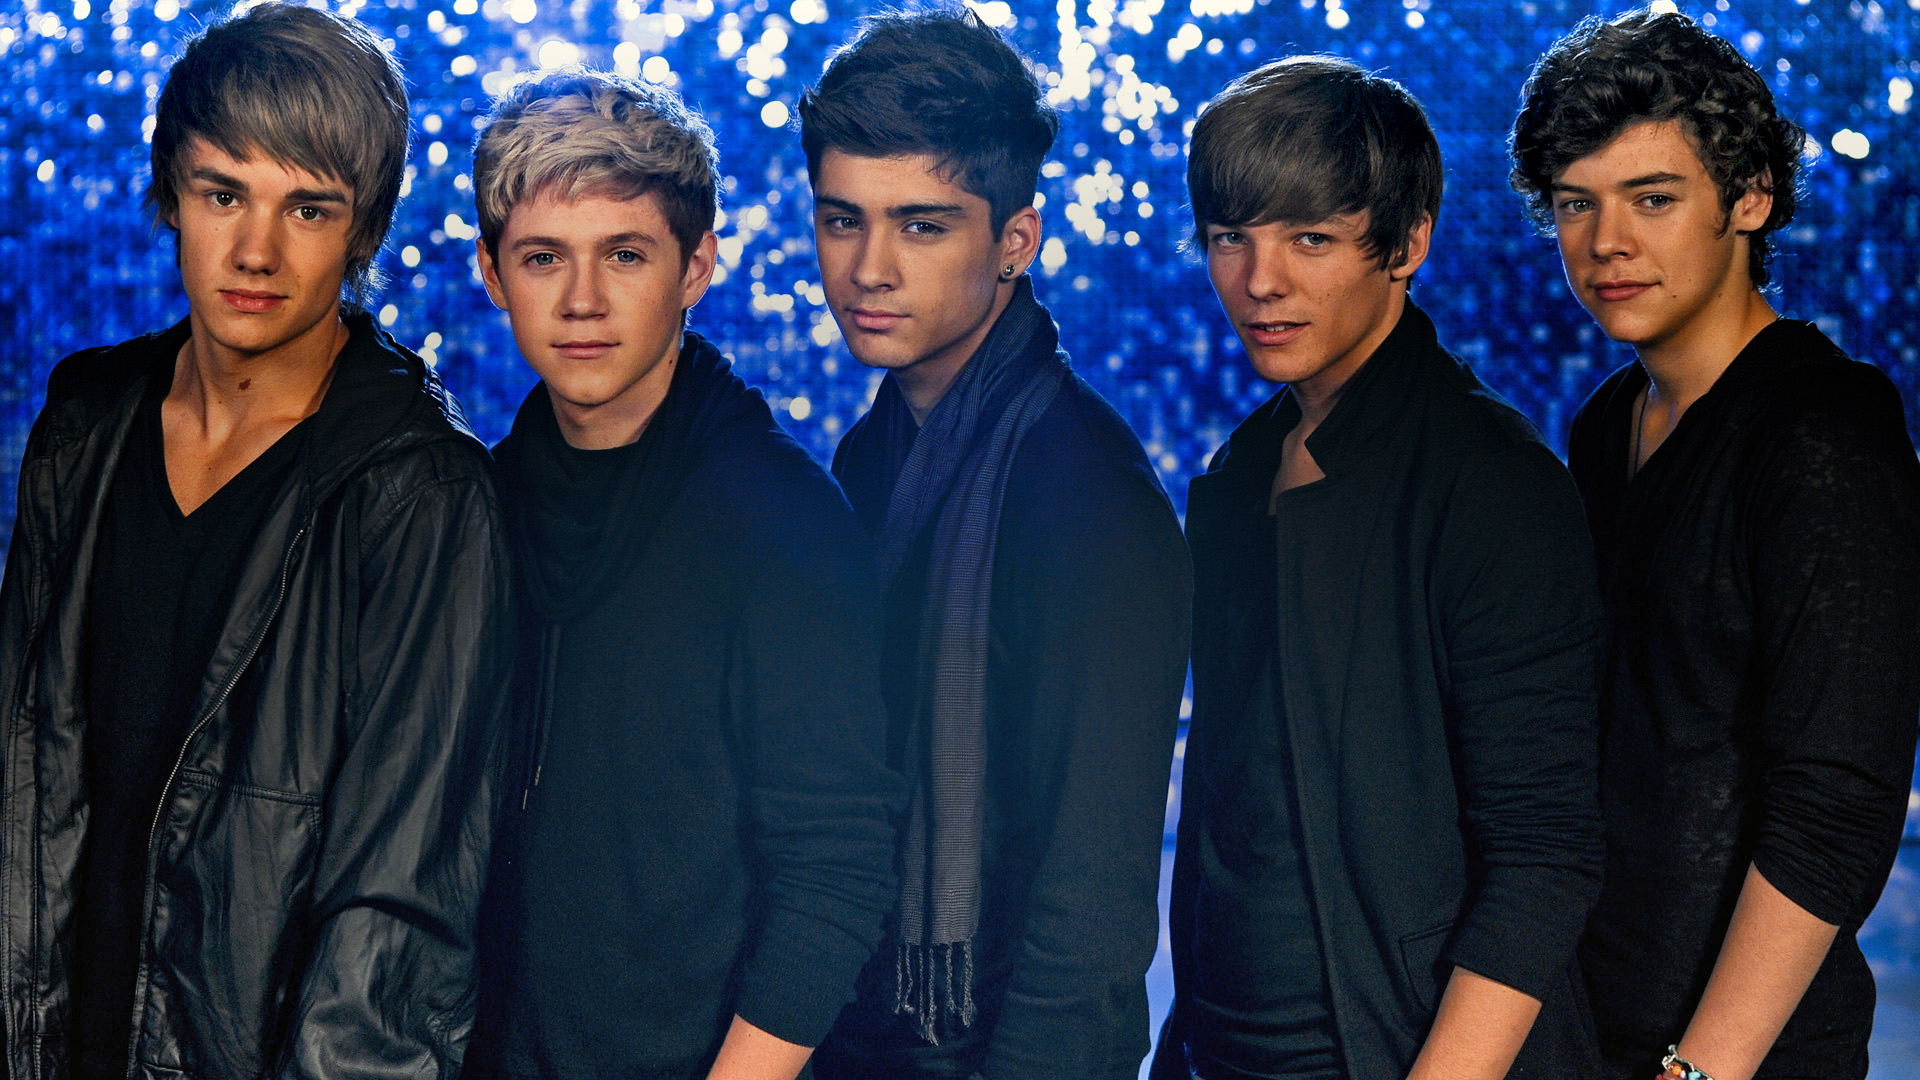 One Direction HD Wallpaper   Wallpaper High Definition High Quality